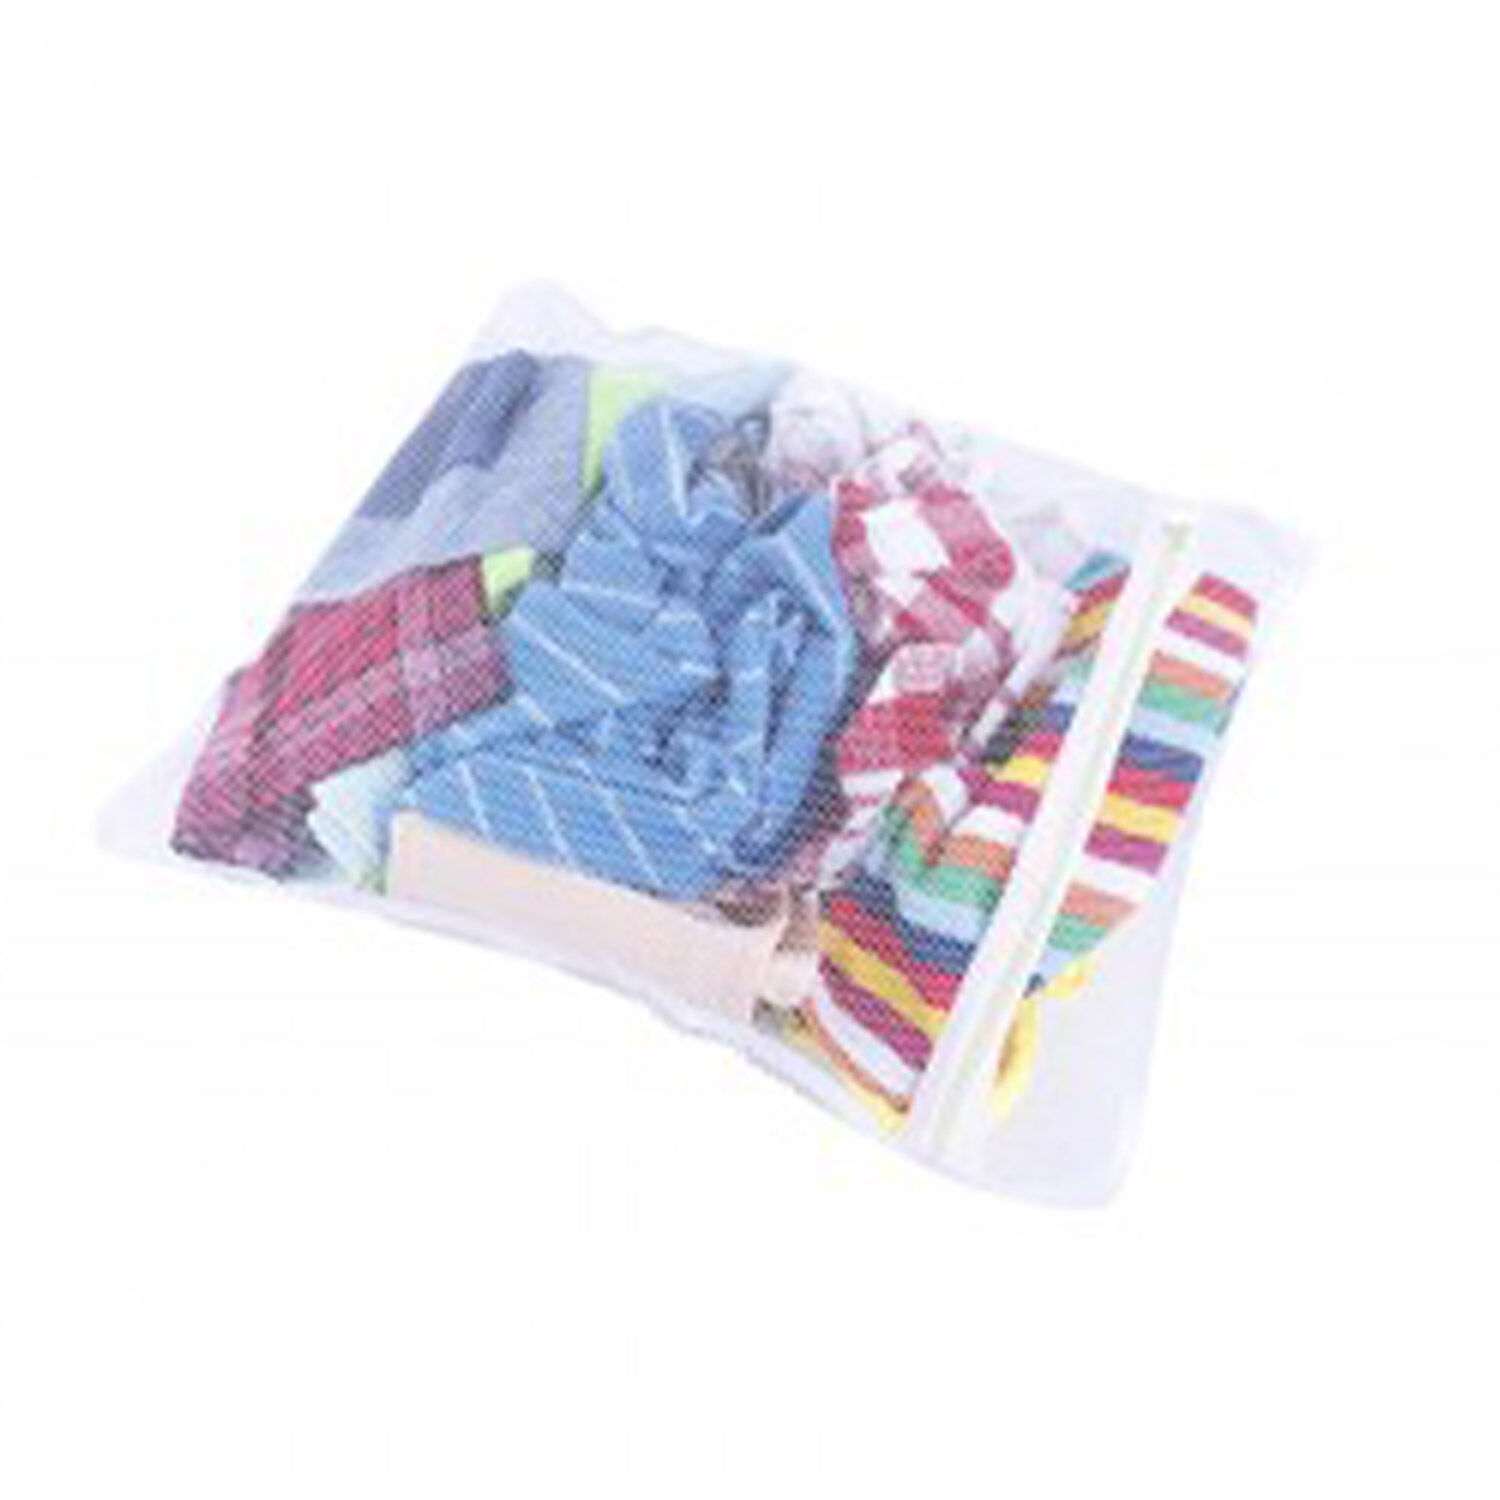 Washing Nets 2-Pack - Home Store + More